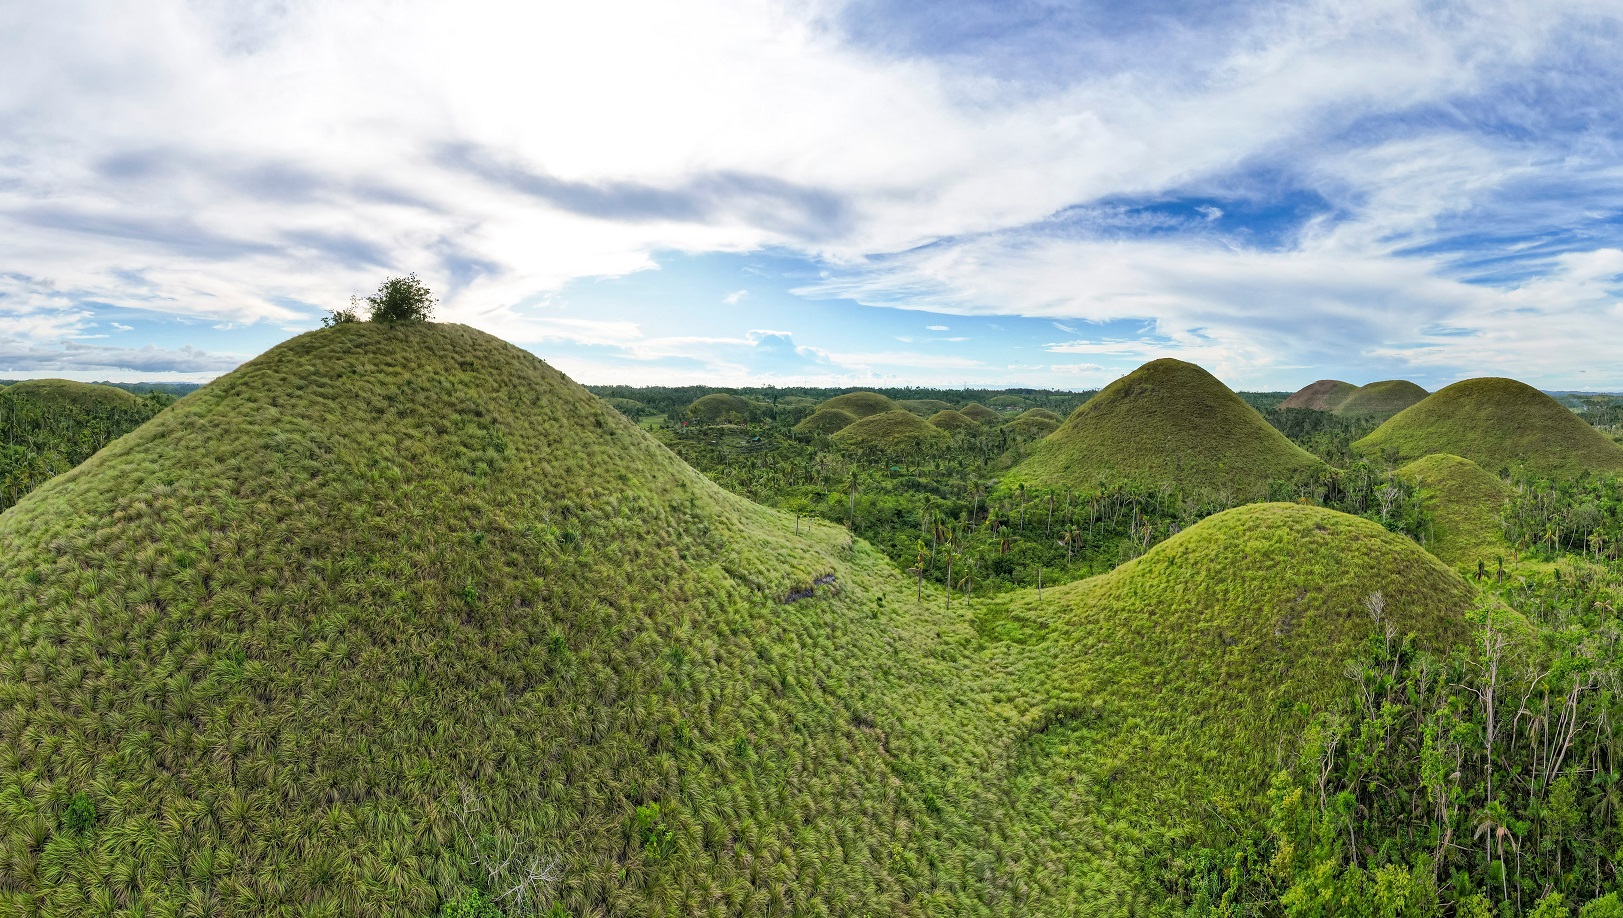 <p>In another legend, the origins of the Chocolate Hills are even more tragic. It’s said that a young giant named Agoro fell in love with human woman named Aloya. </p>  <p>They were together for many years, until Aloya fell ill and perished. Agoro’s tears of grief pooled on the ground, becoming the Chocolate Hills.</p>